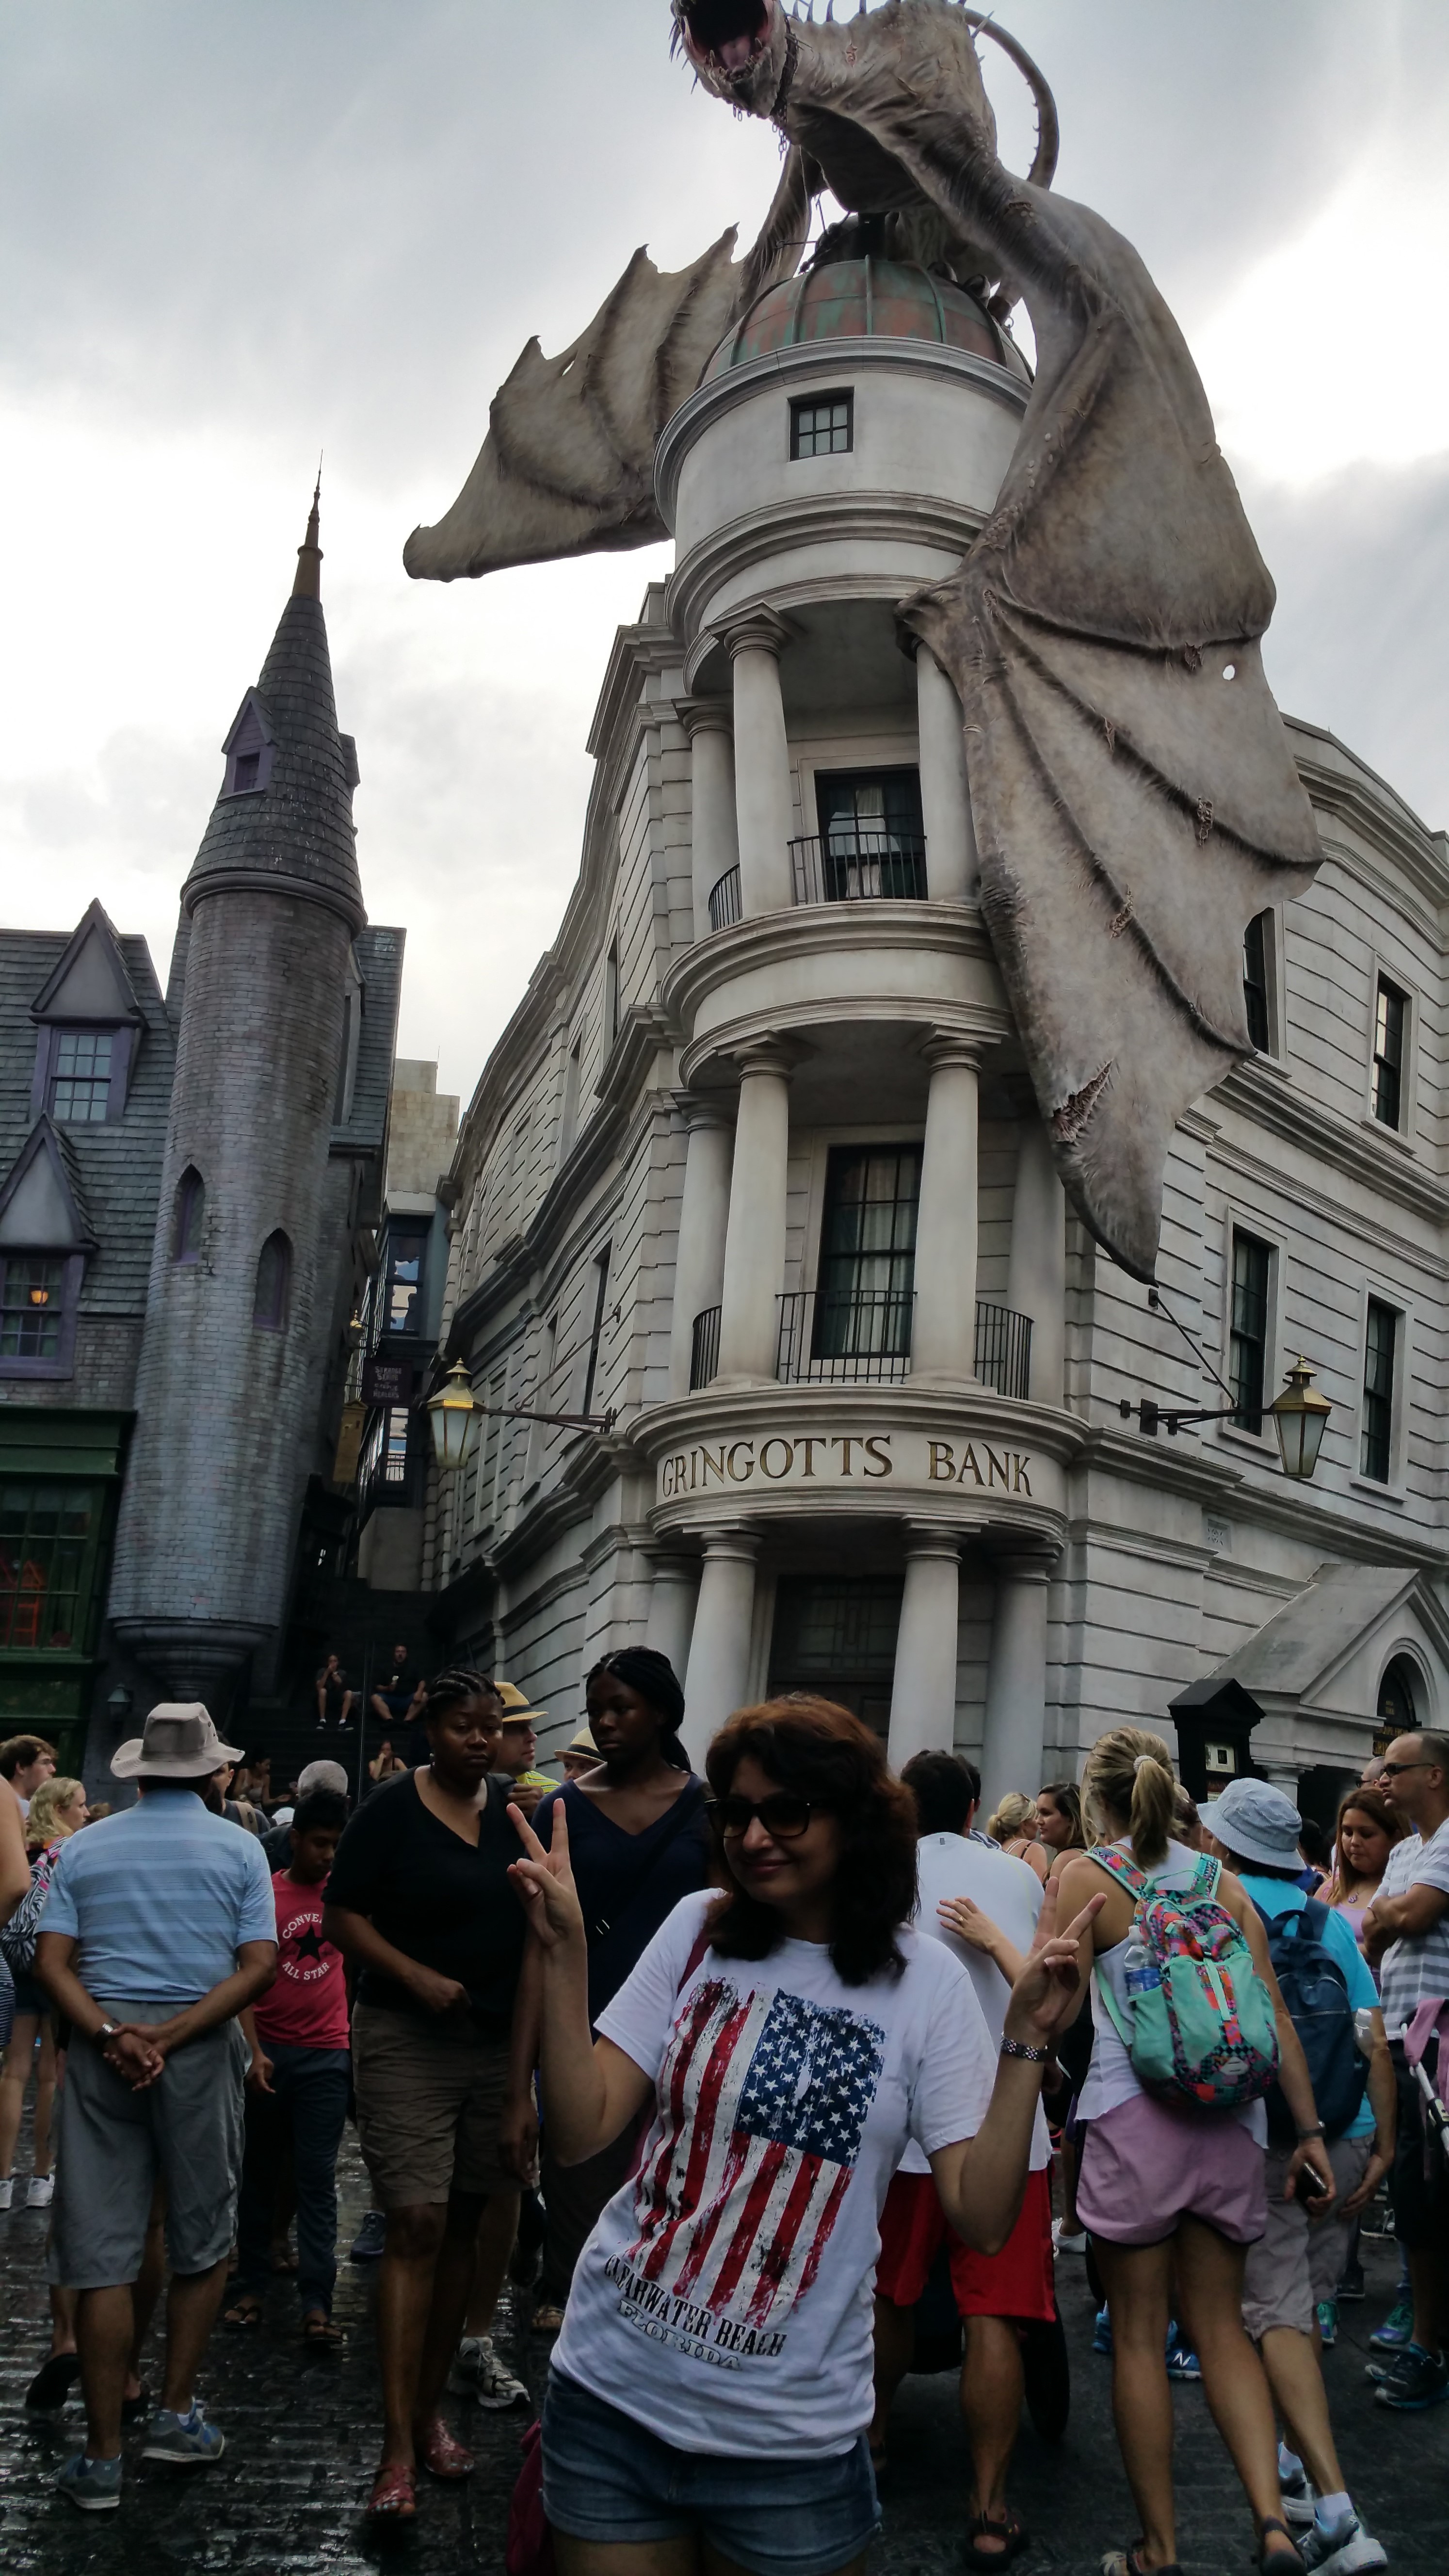 Diagon Alley- The Wizarding World of Harry Potter, Universal Studios, FL